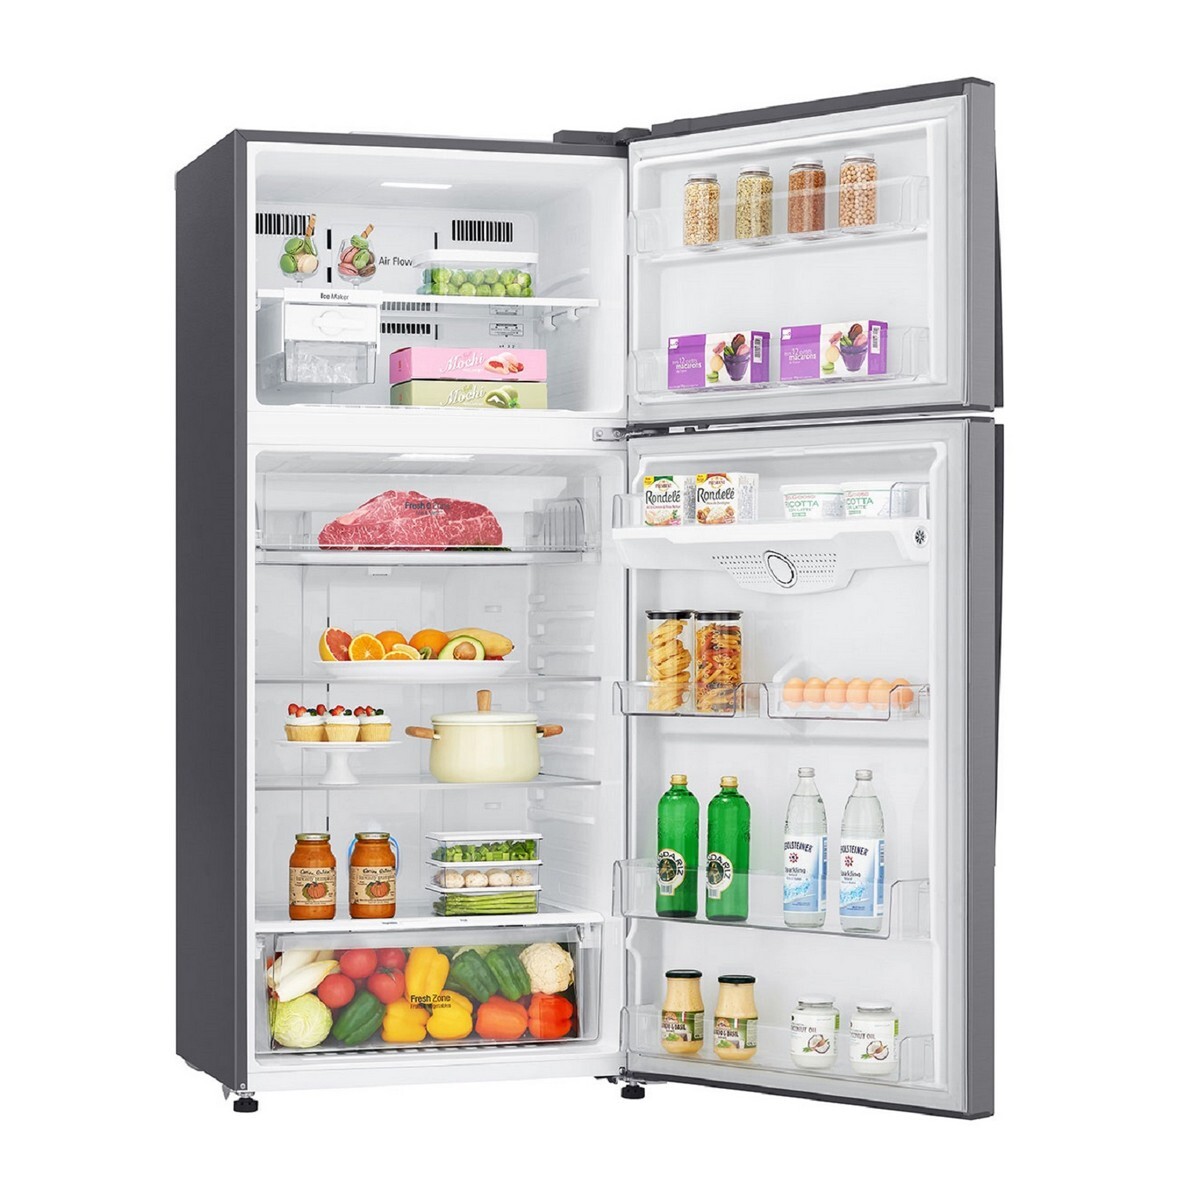 LG Frost Free Double Door Refrigerator GN-H602HLHM 475L